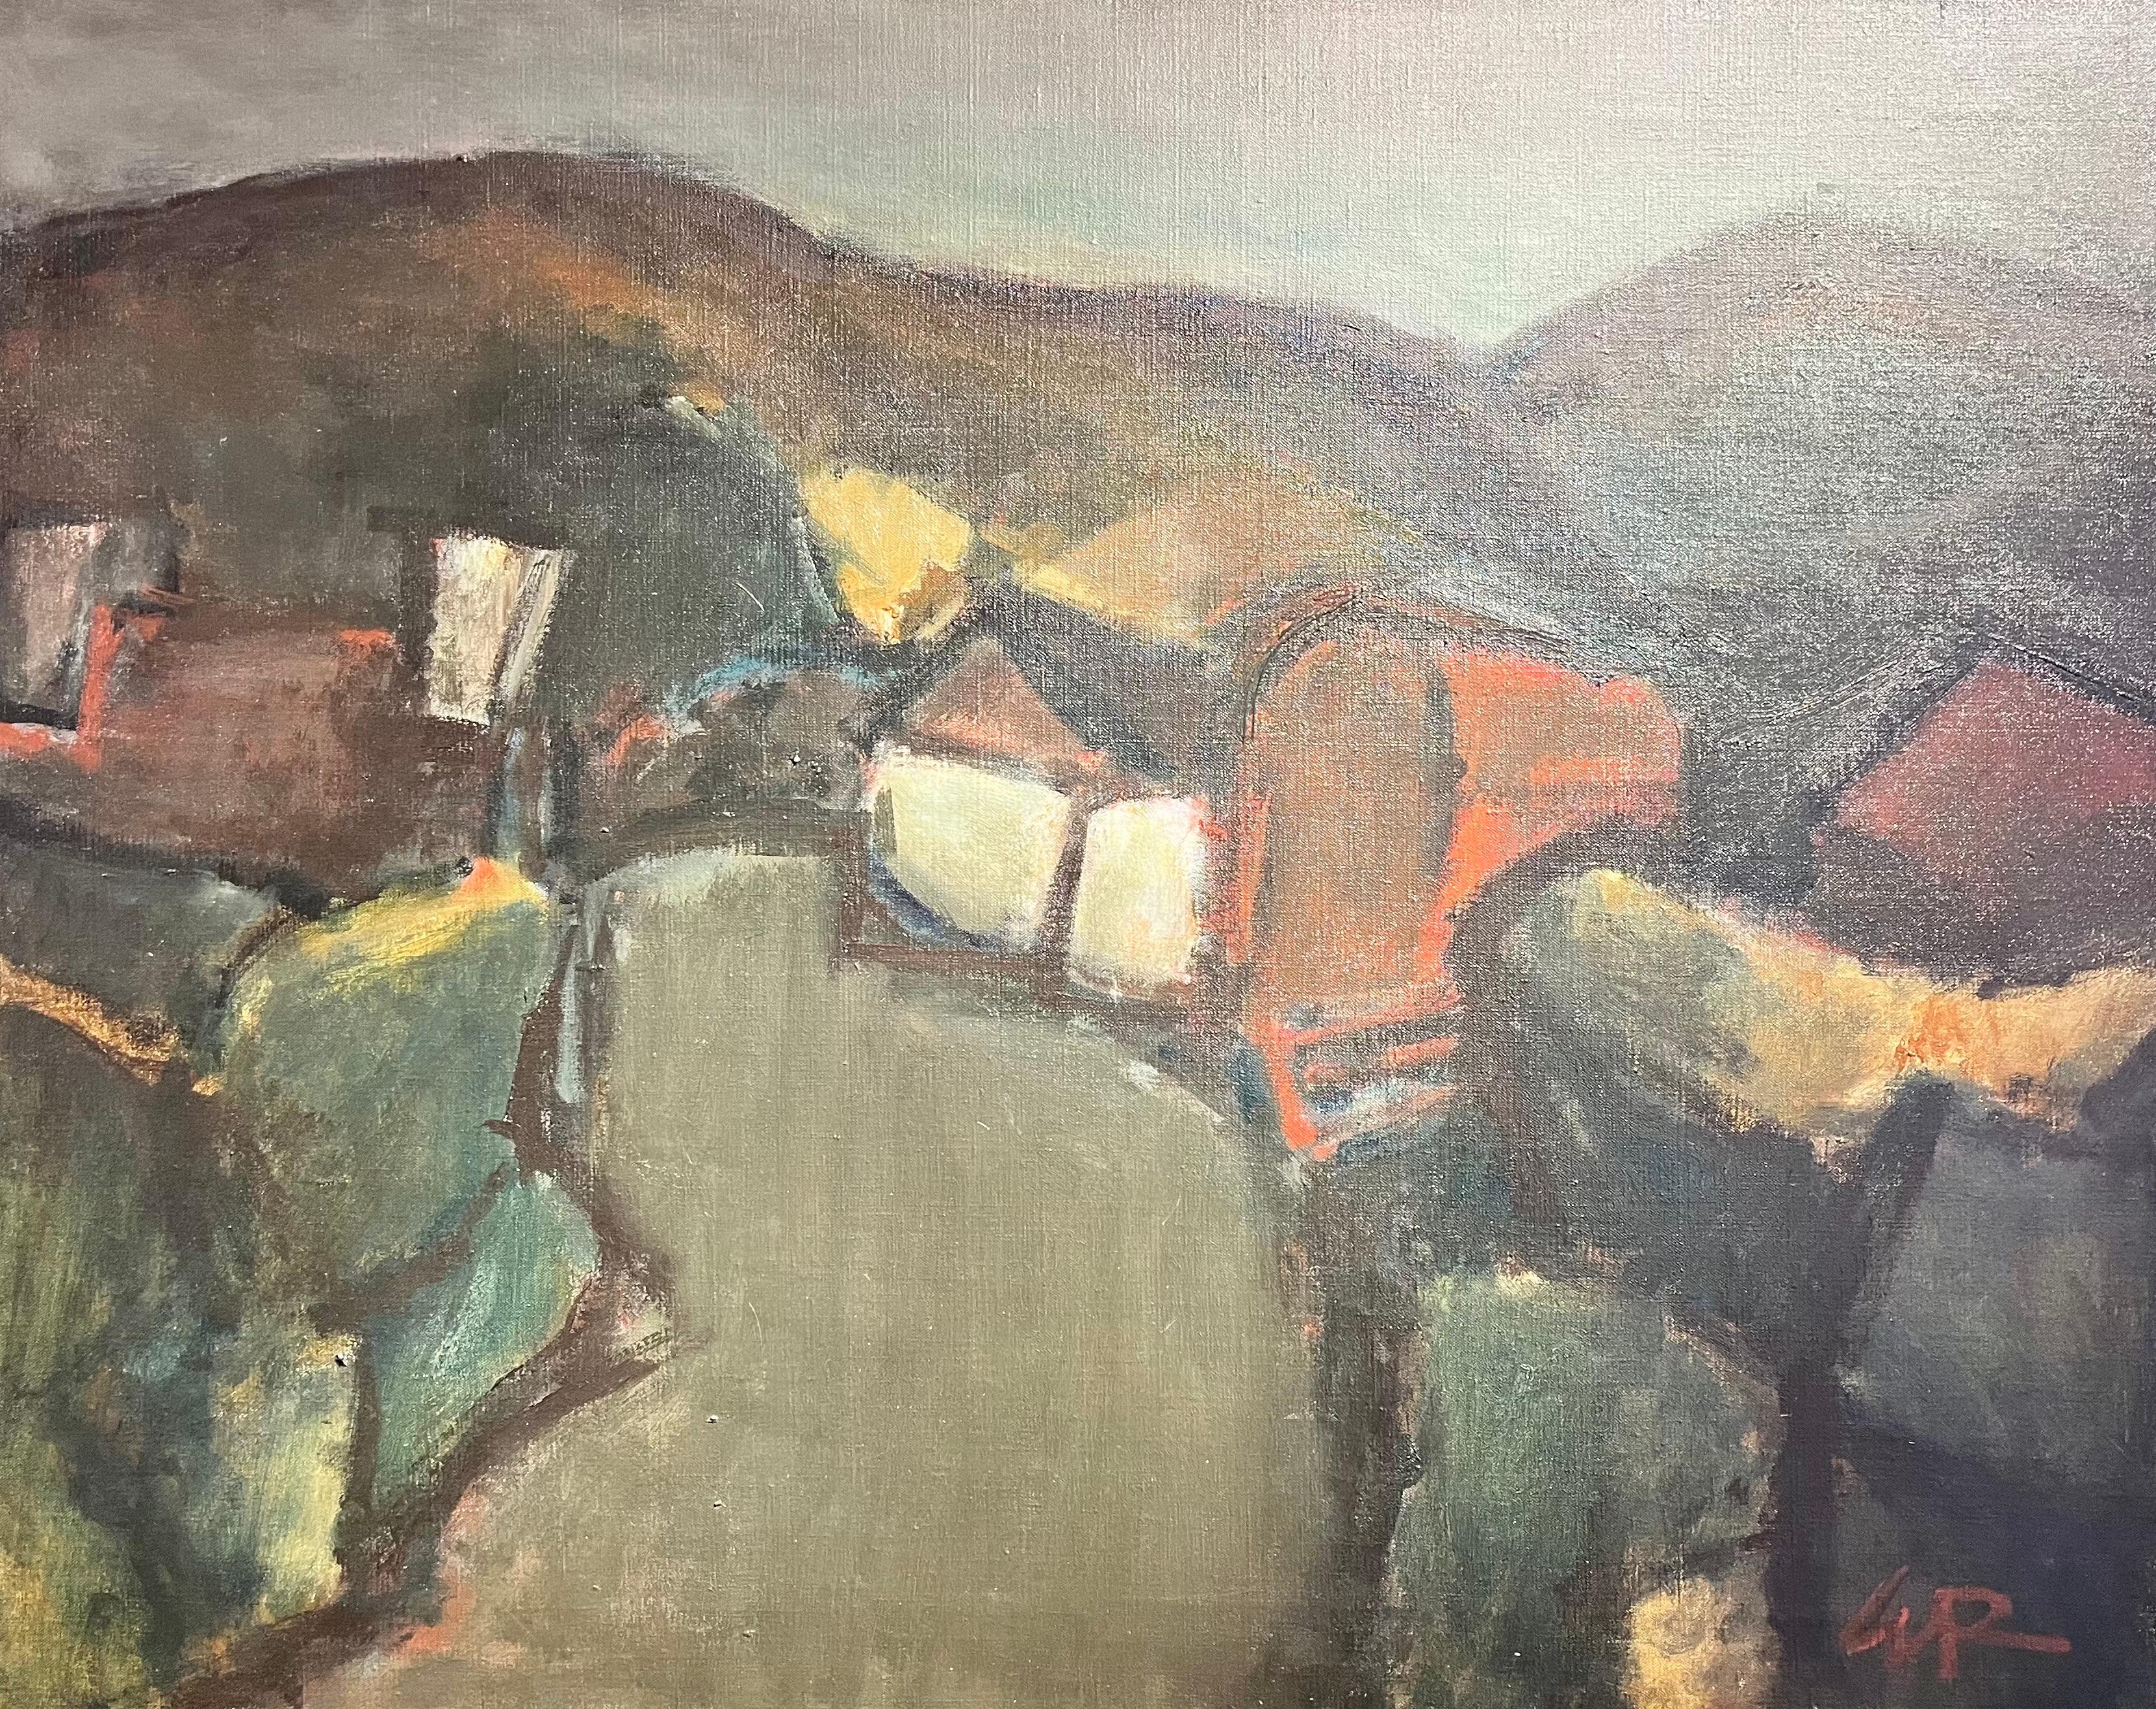 'Red Barn' Dark Atmospheric painting of a welsh landscape, building, hills - Painting by Will Roberts